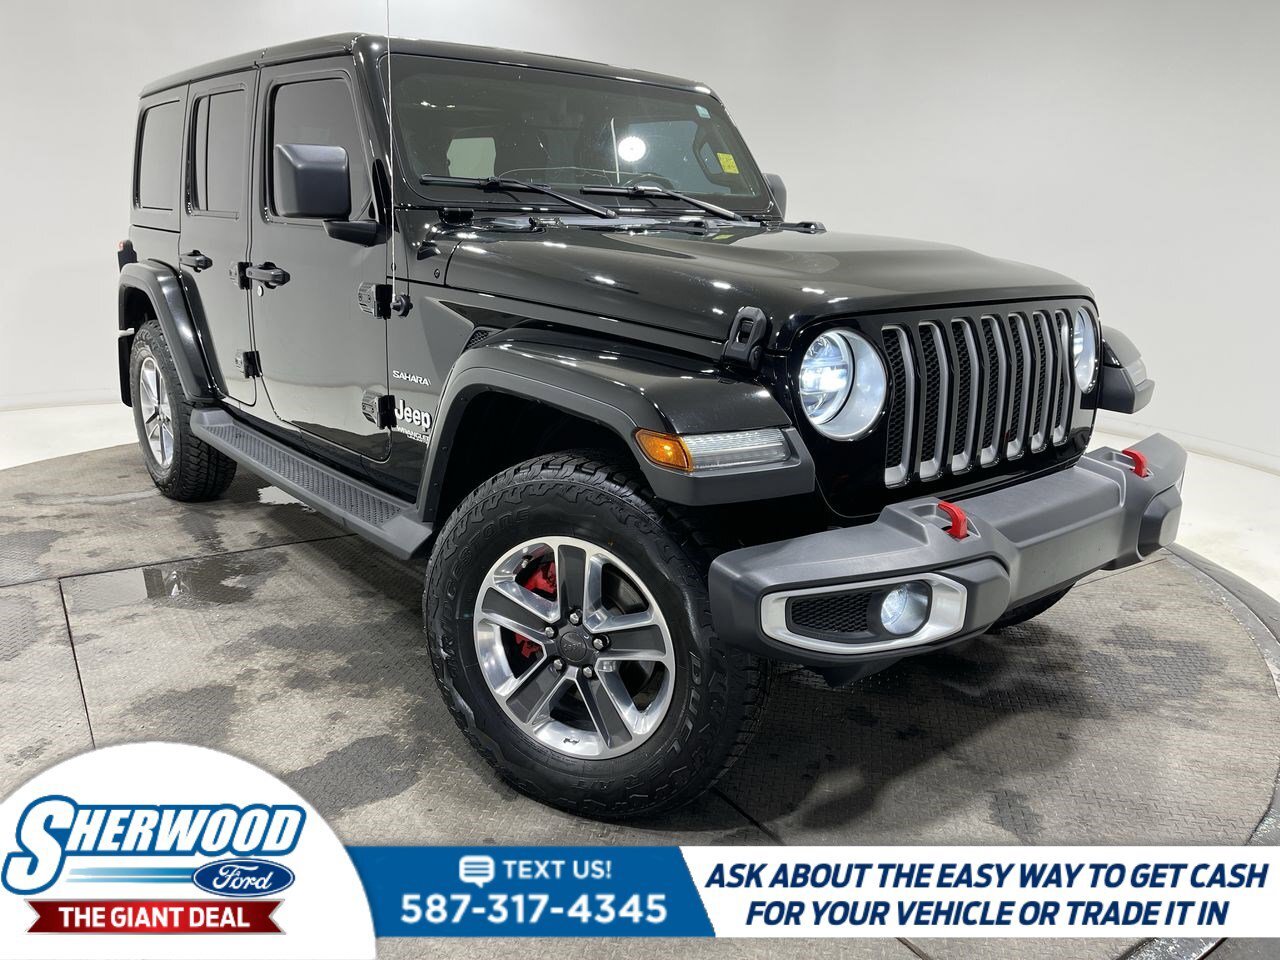 2020 Jeep WRANGLER UNLIMITED Sahara $0 Down $177 Weekly- LEATHER